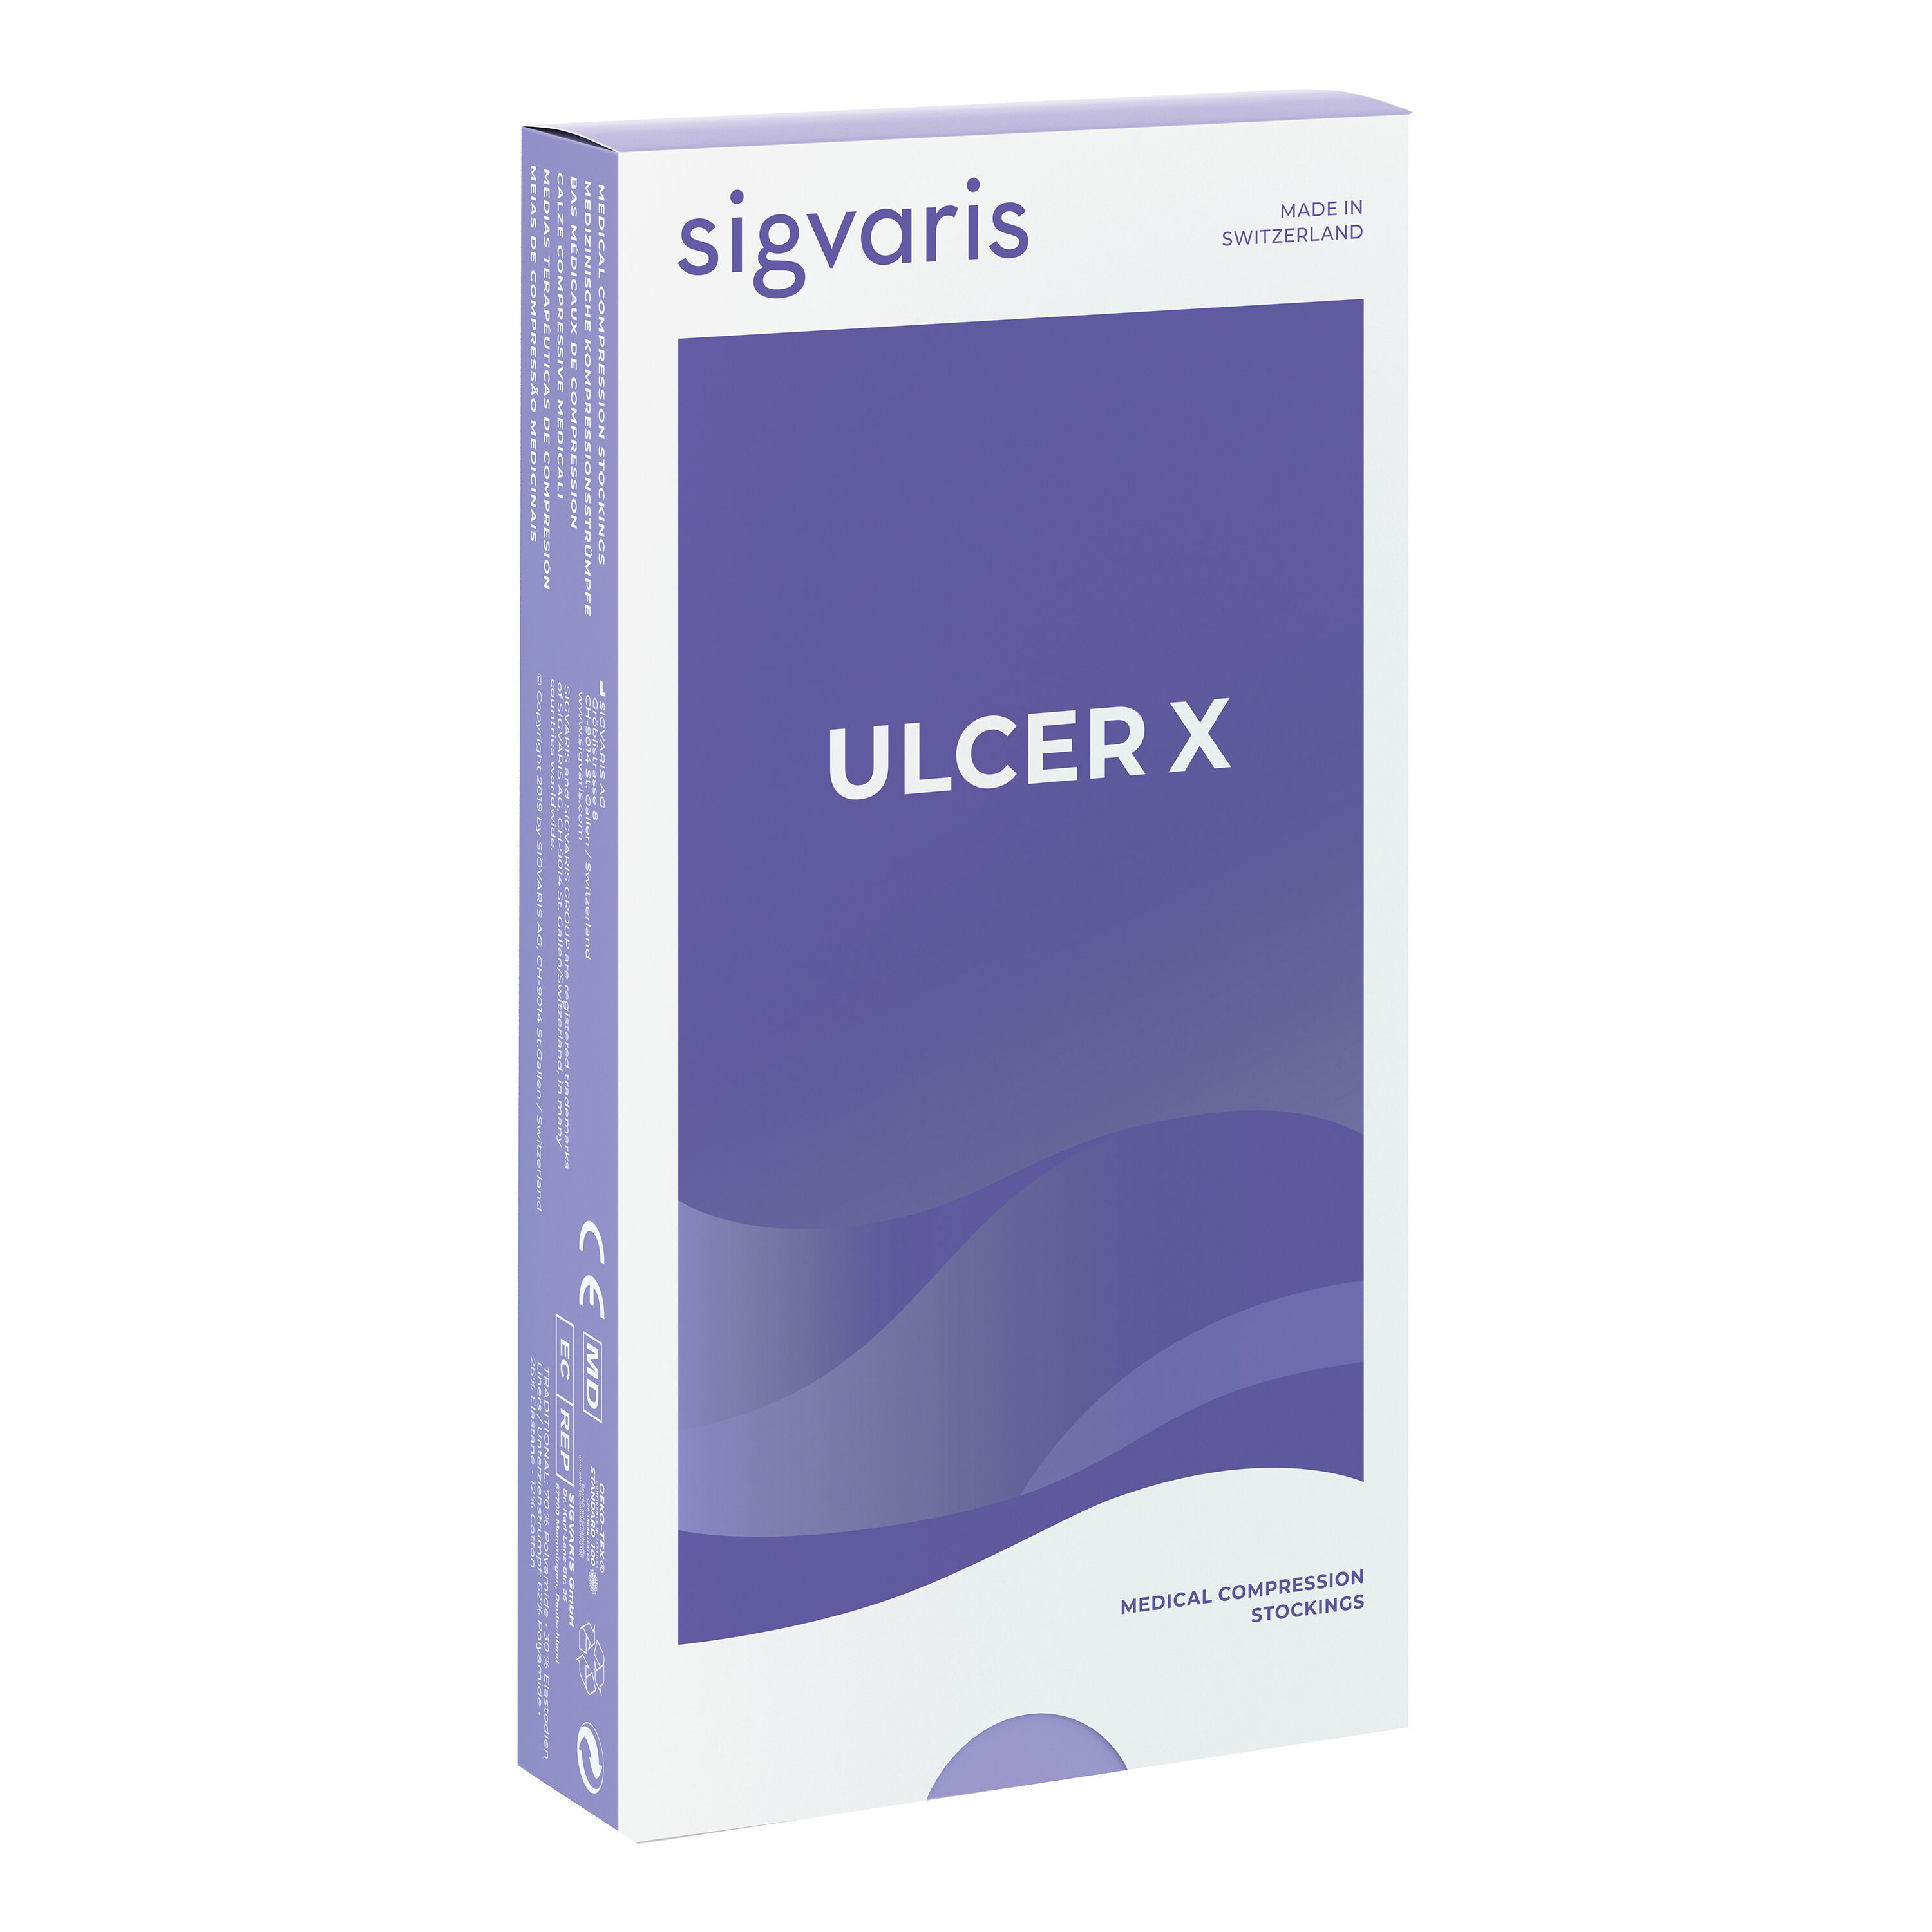 SIGVARIS ulcer x kit ccl2 gambaletto beige lungo xl plus